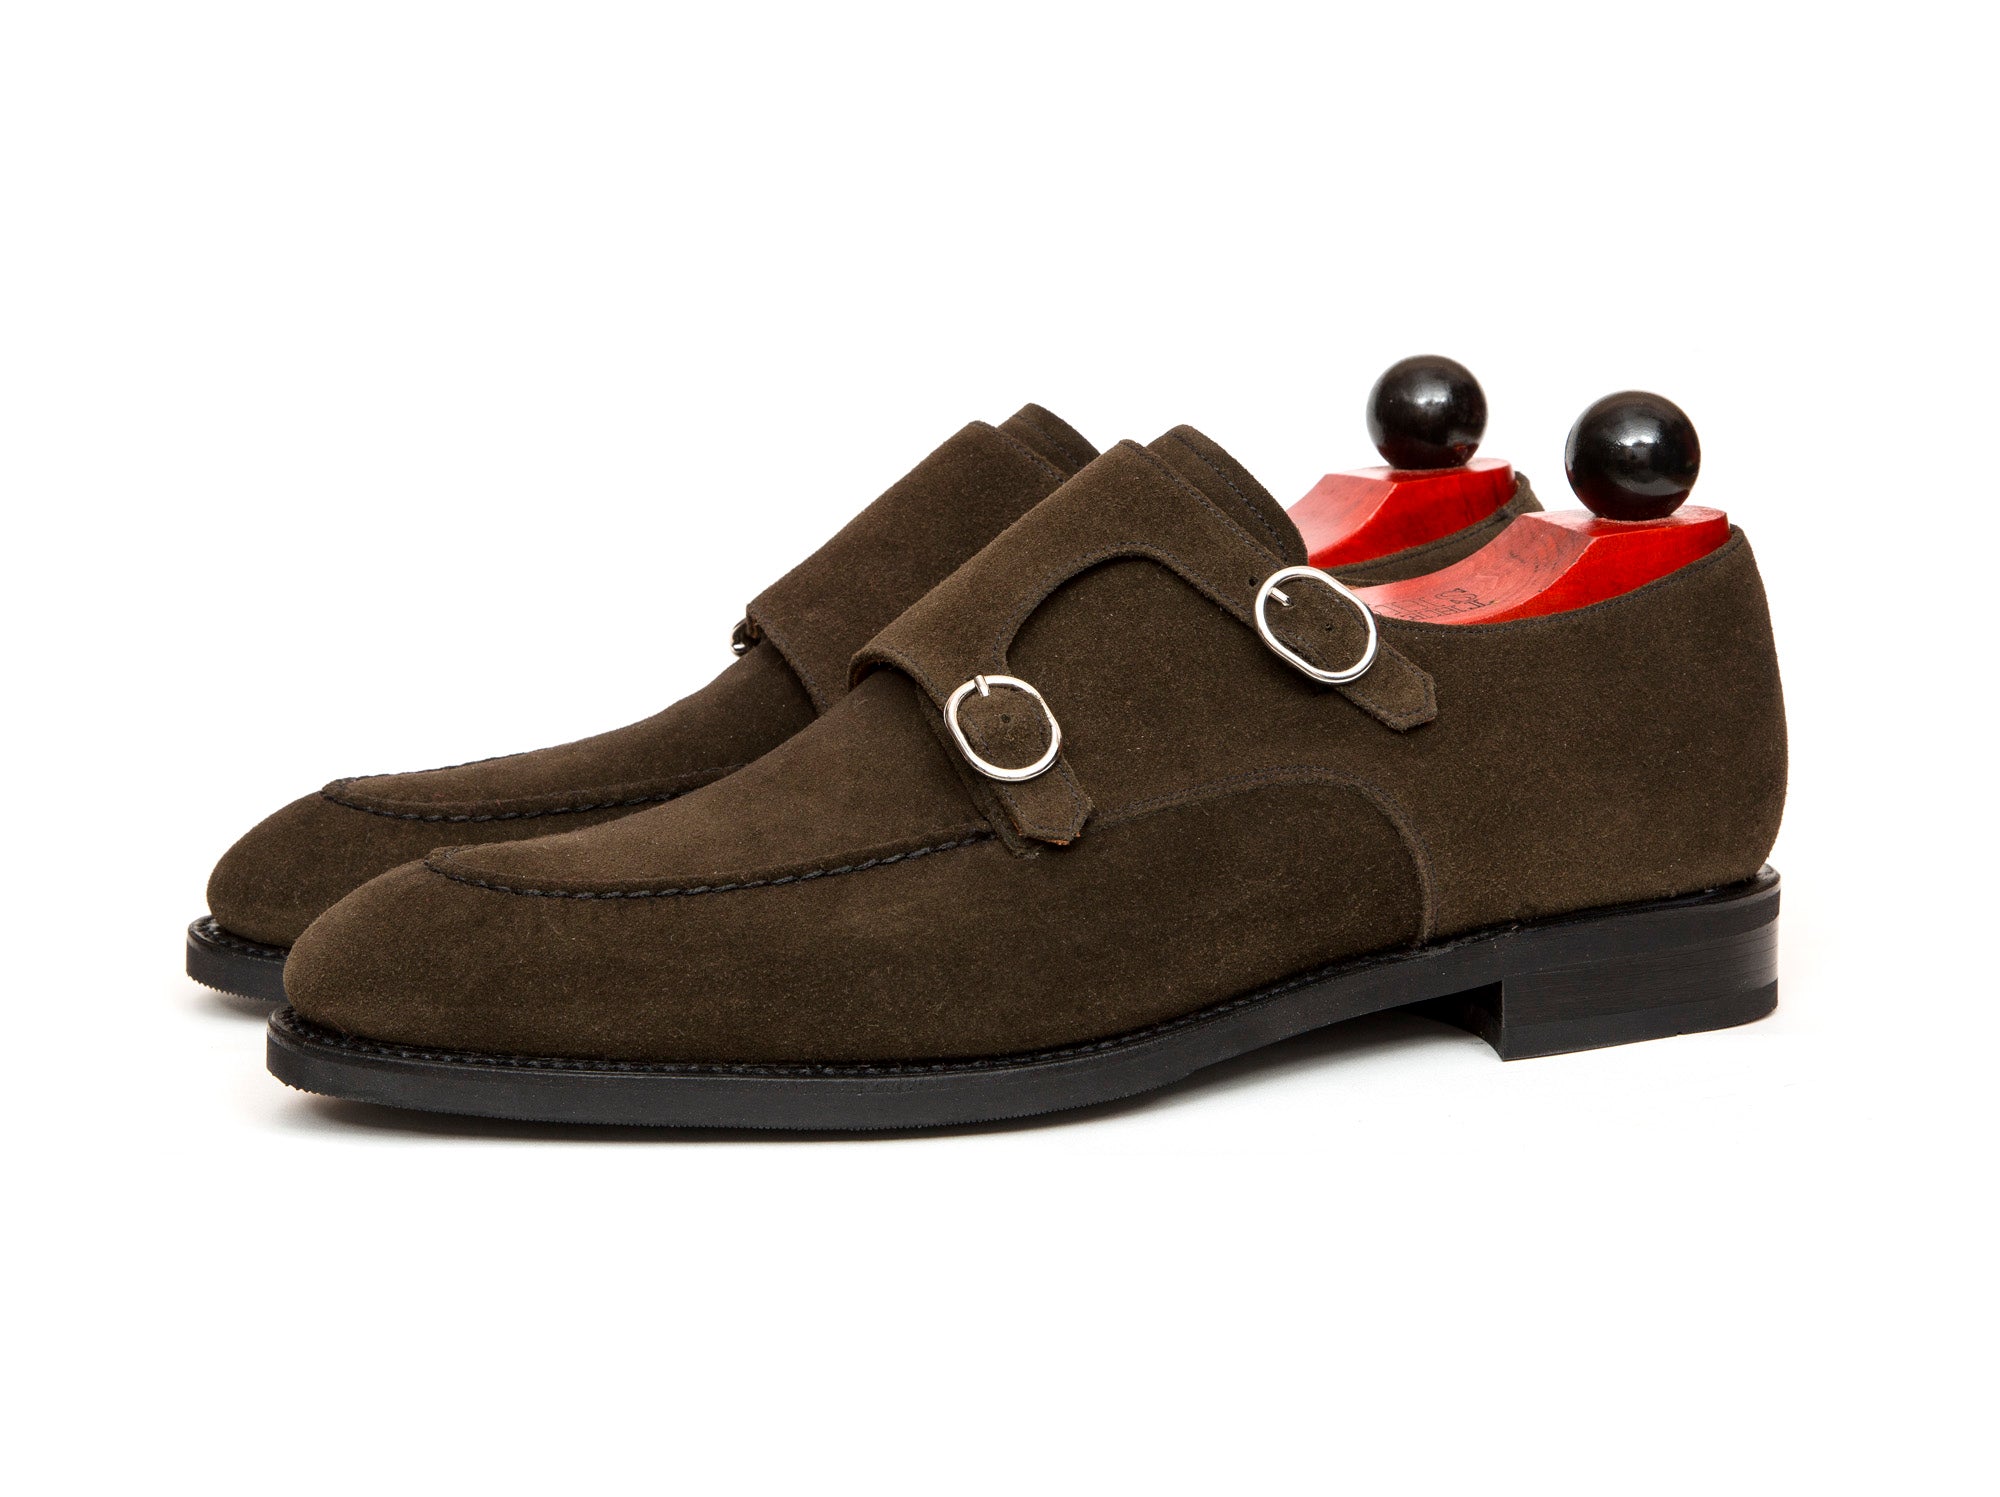 Montlake - MTO - Moss Suede - NGT Last - City Rubber Sole